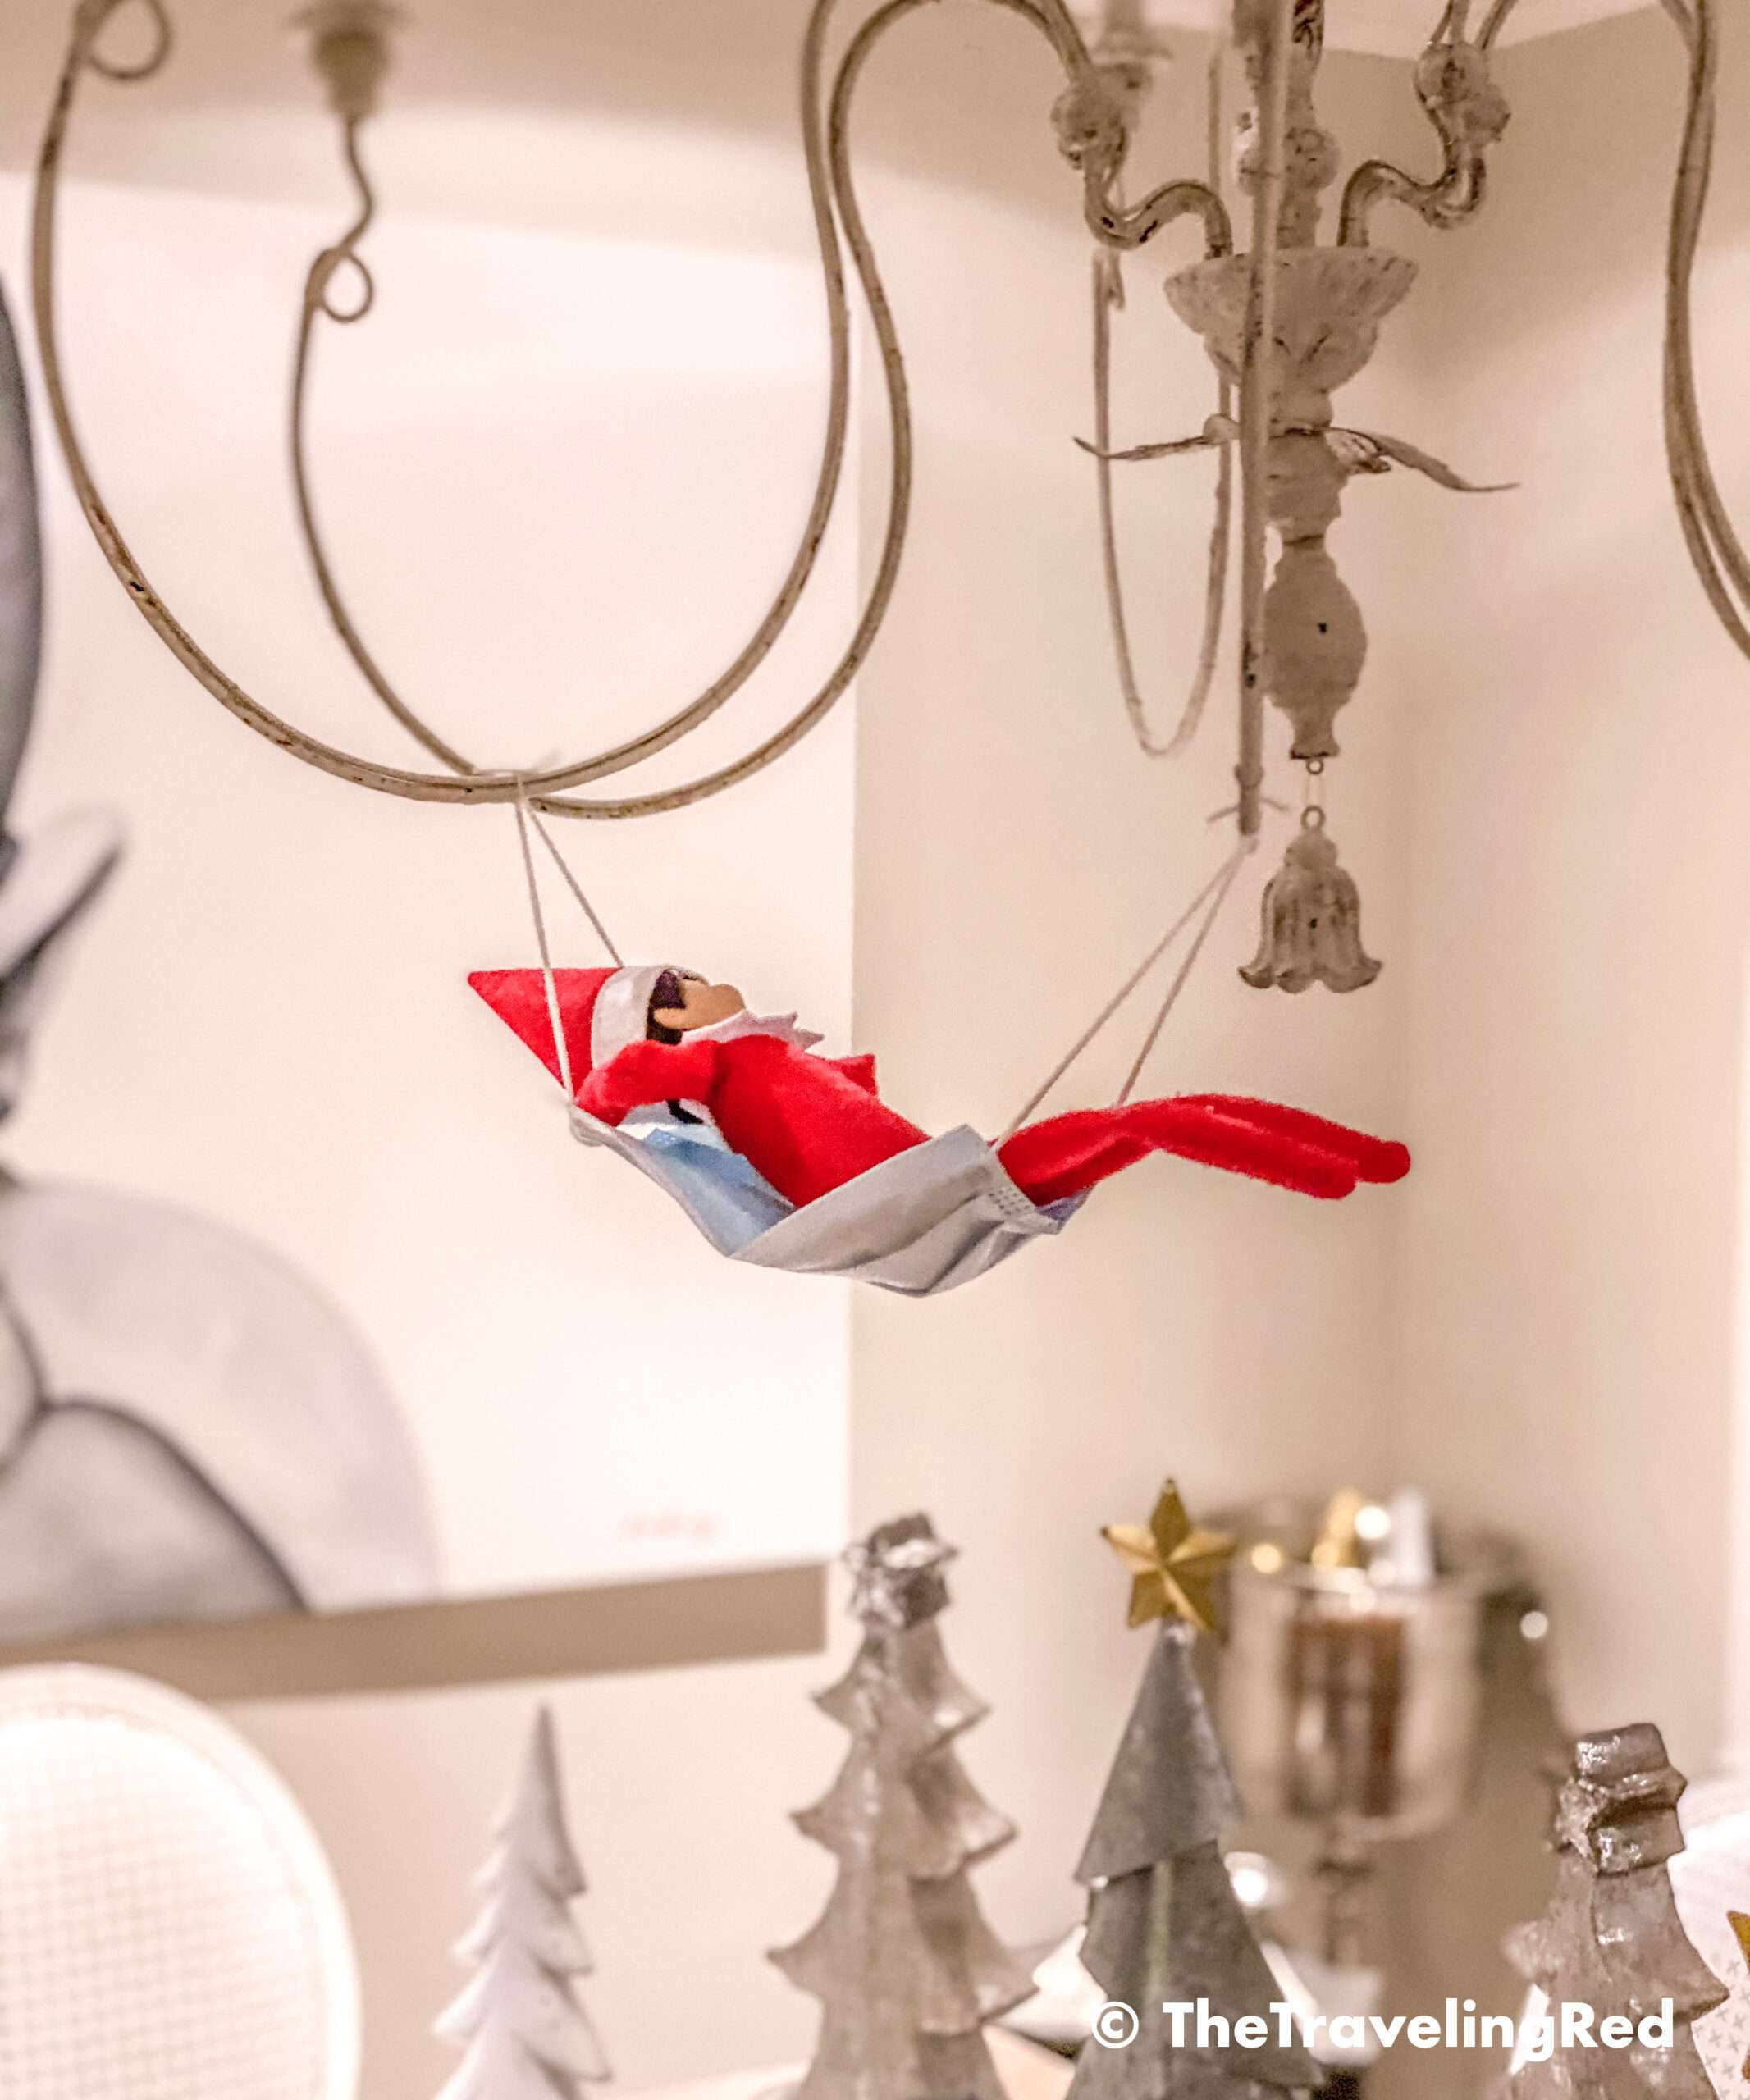 Naughty Elf on the shelf uses a disposable face mask as a hammock and put it on our chandelier. Fun and easy elf on the shelf ideas for a naughty elf that are quick and easy using things you have at home.